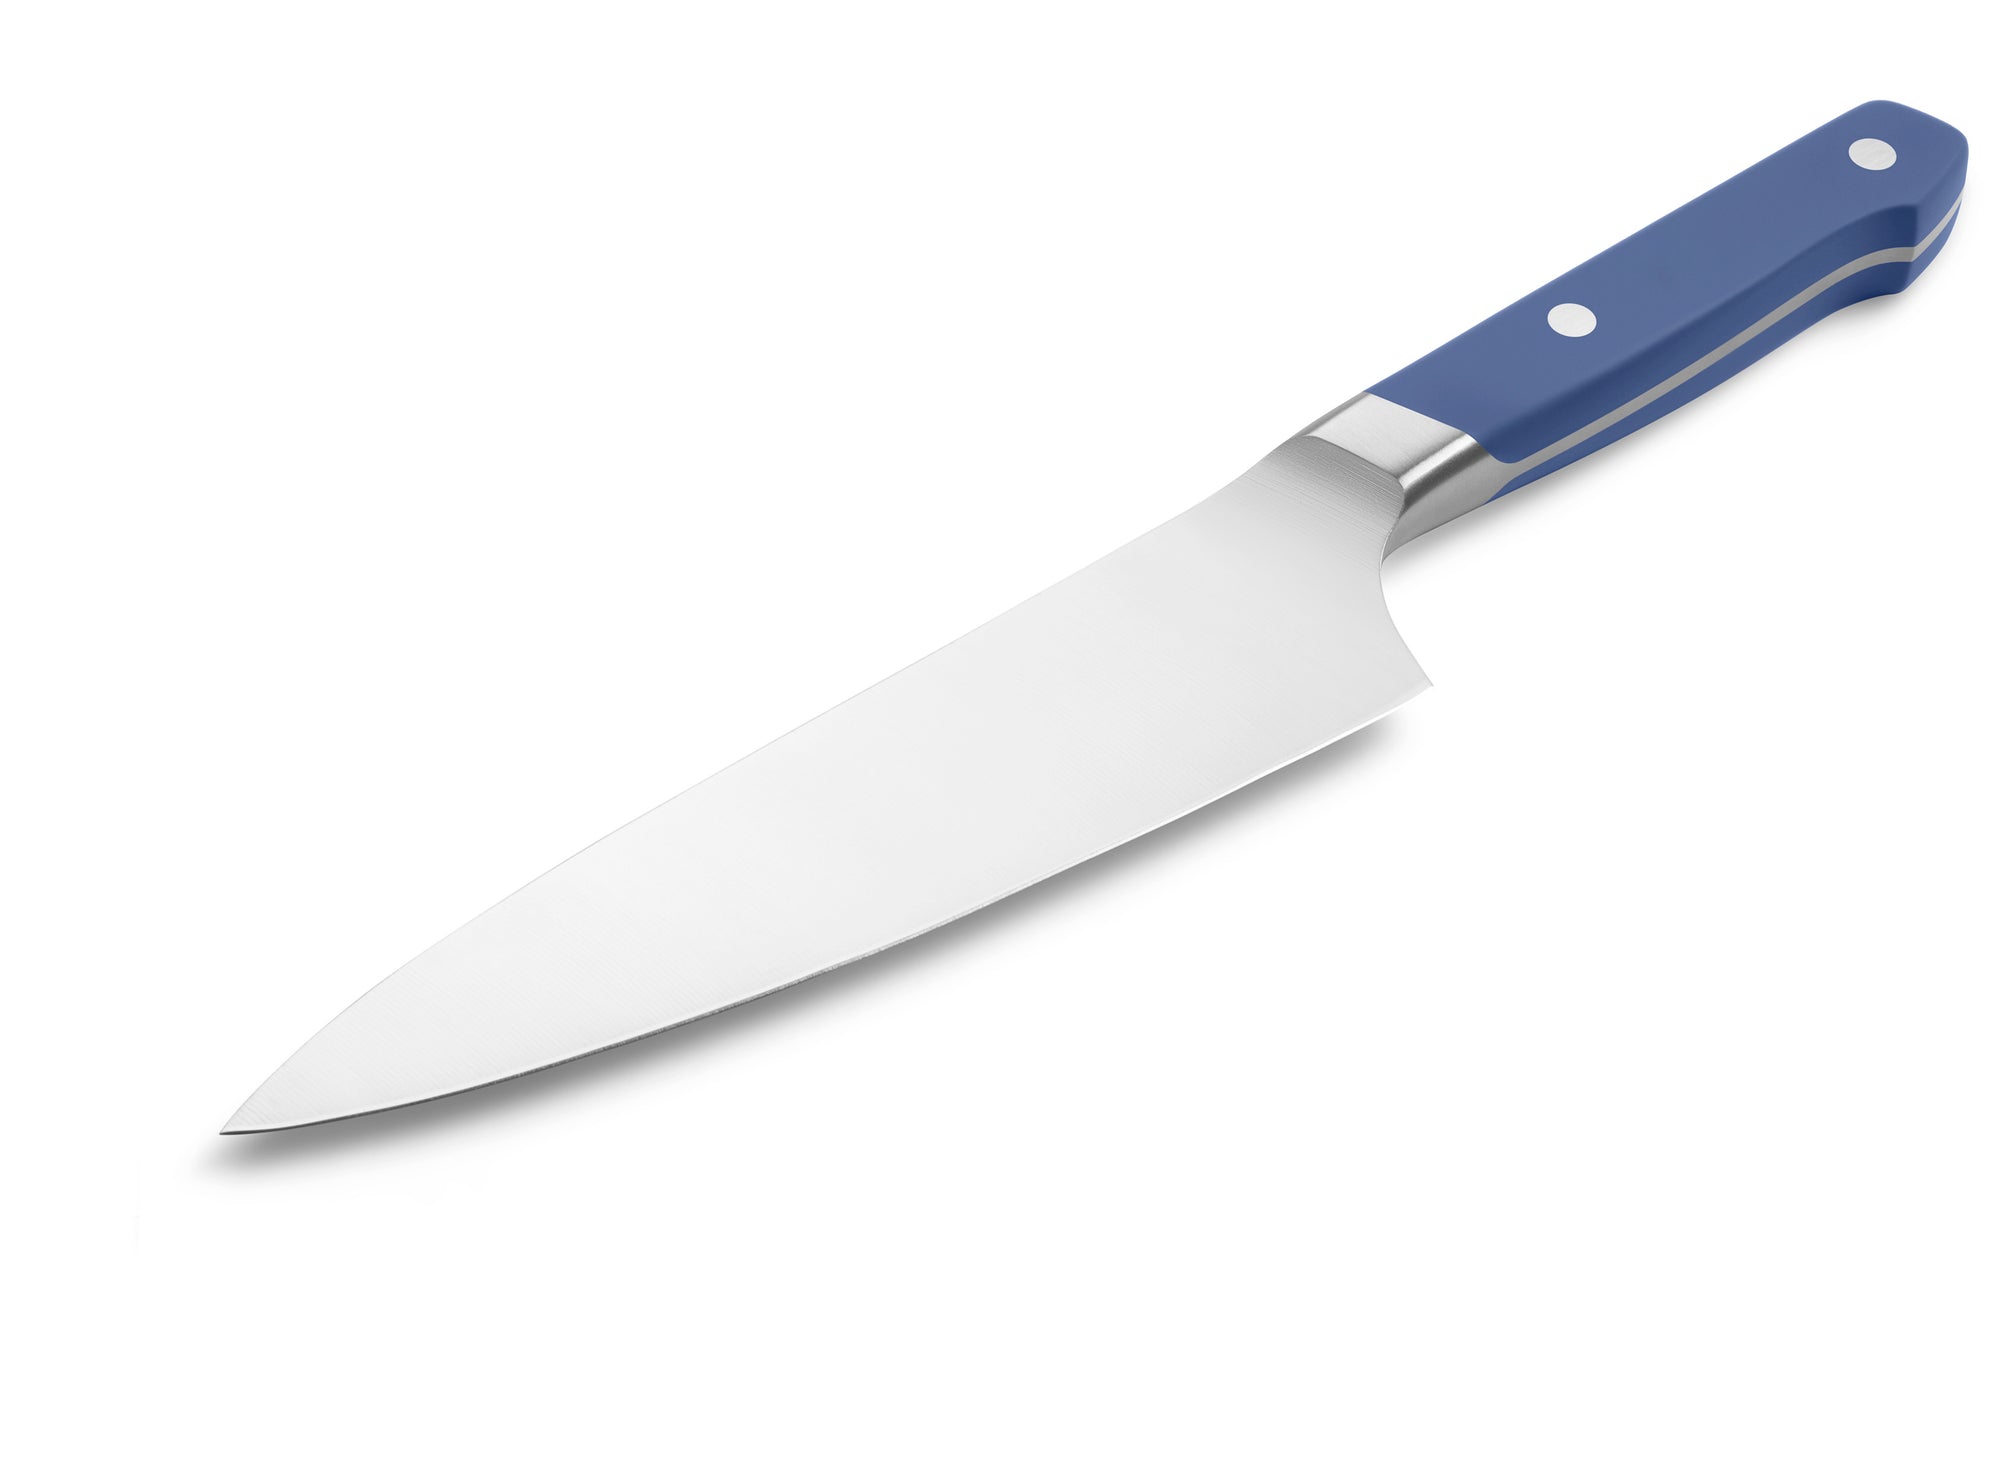 The Misen Chef's Knife in blue features a thick spine and a hybrid German/Japanese belly.